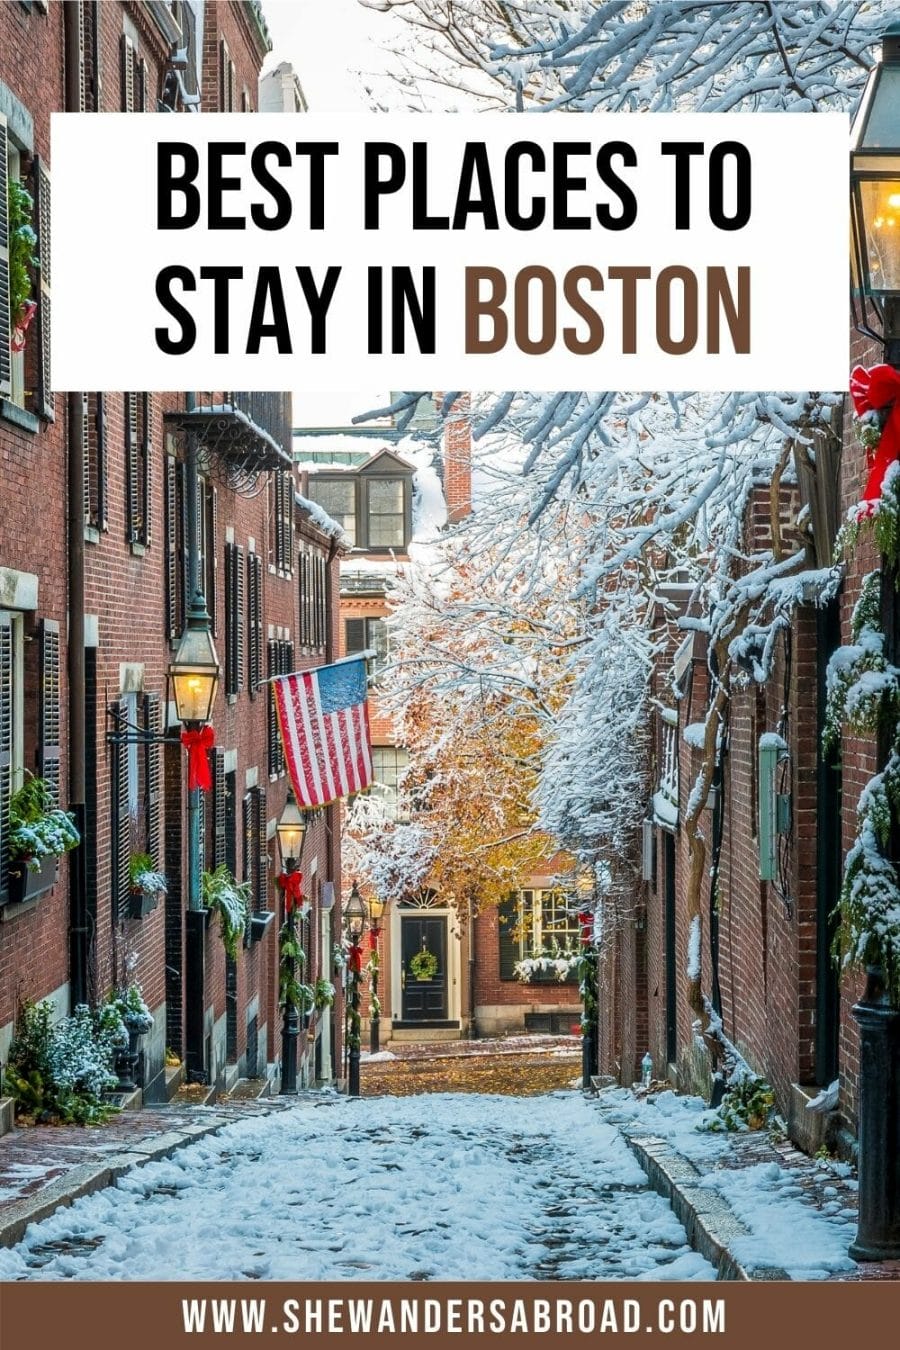 Where to Stay in Boston: 8 Best Areas & Hotels